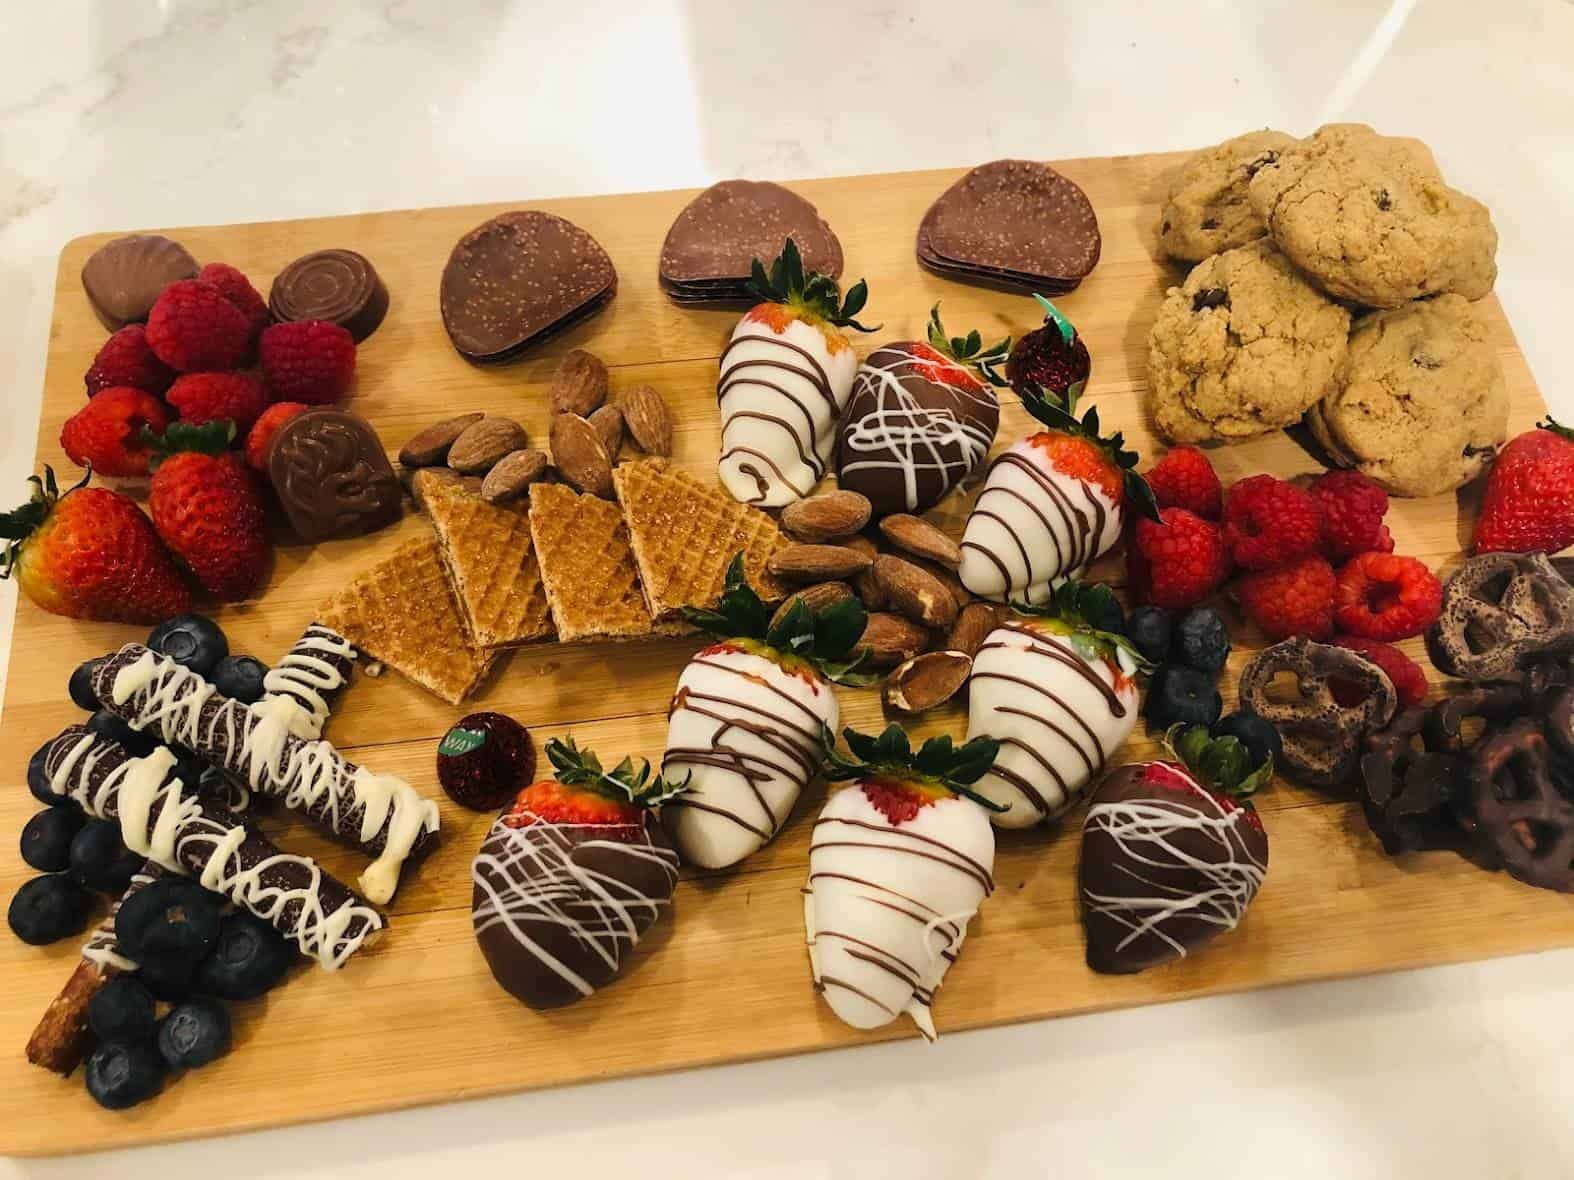 a dessert board made with chocolate covered strawberries, pretzels, fresh fruits, nuts and cookies